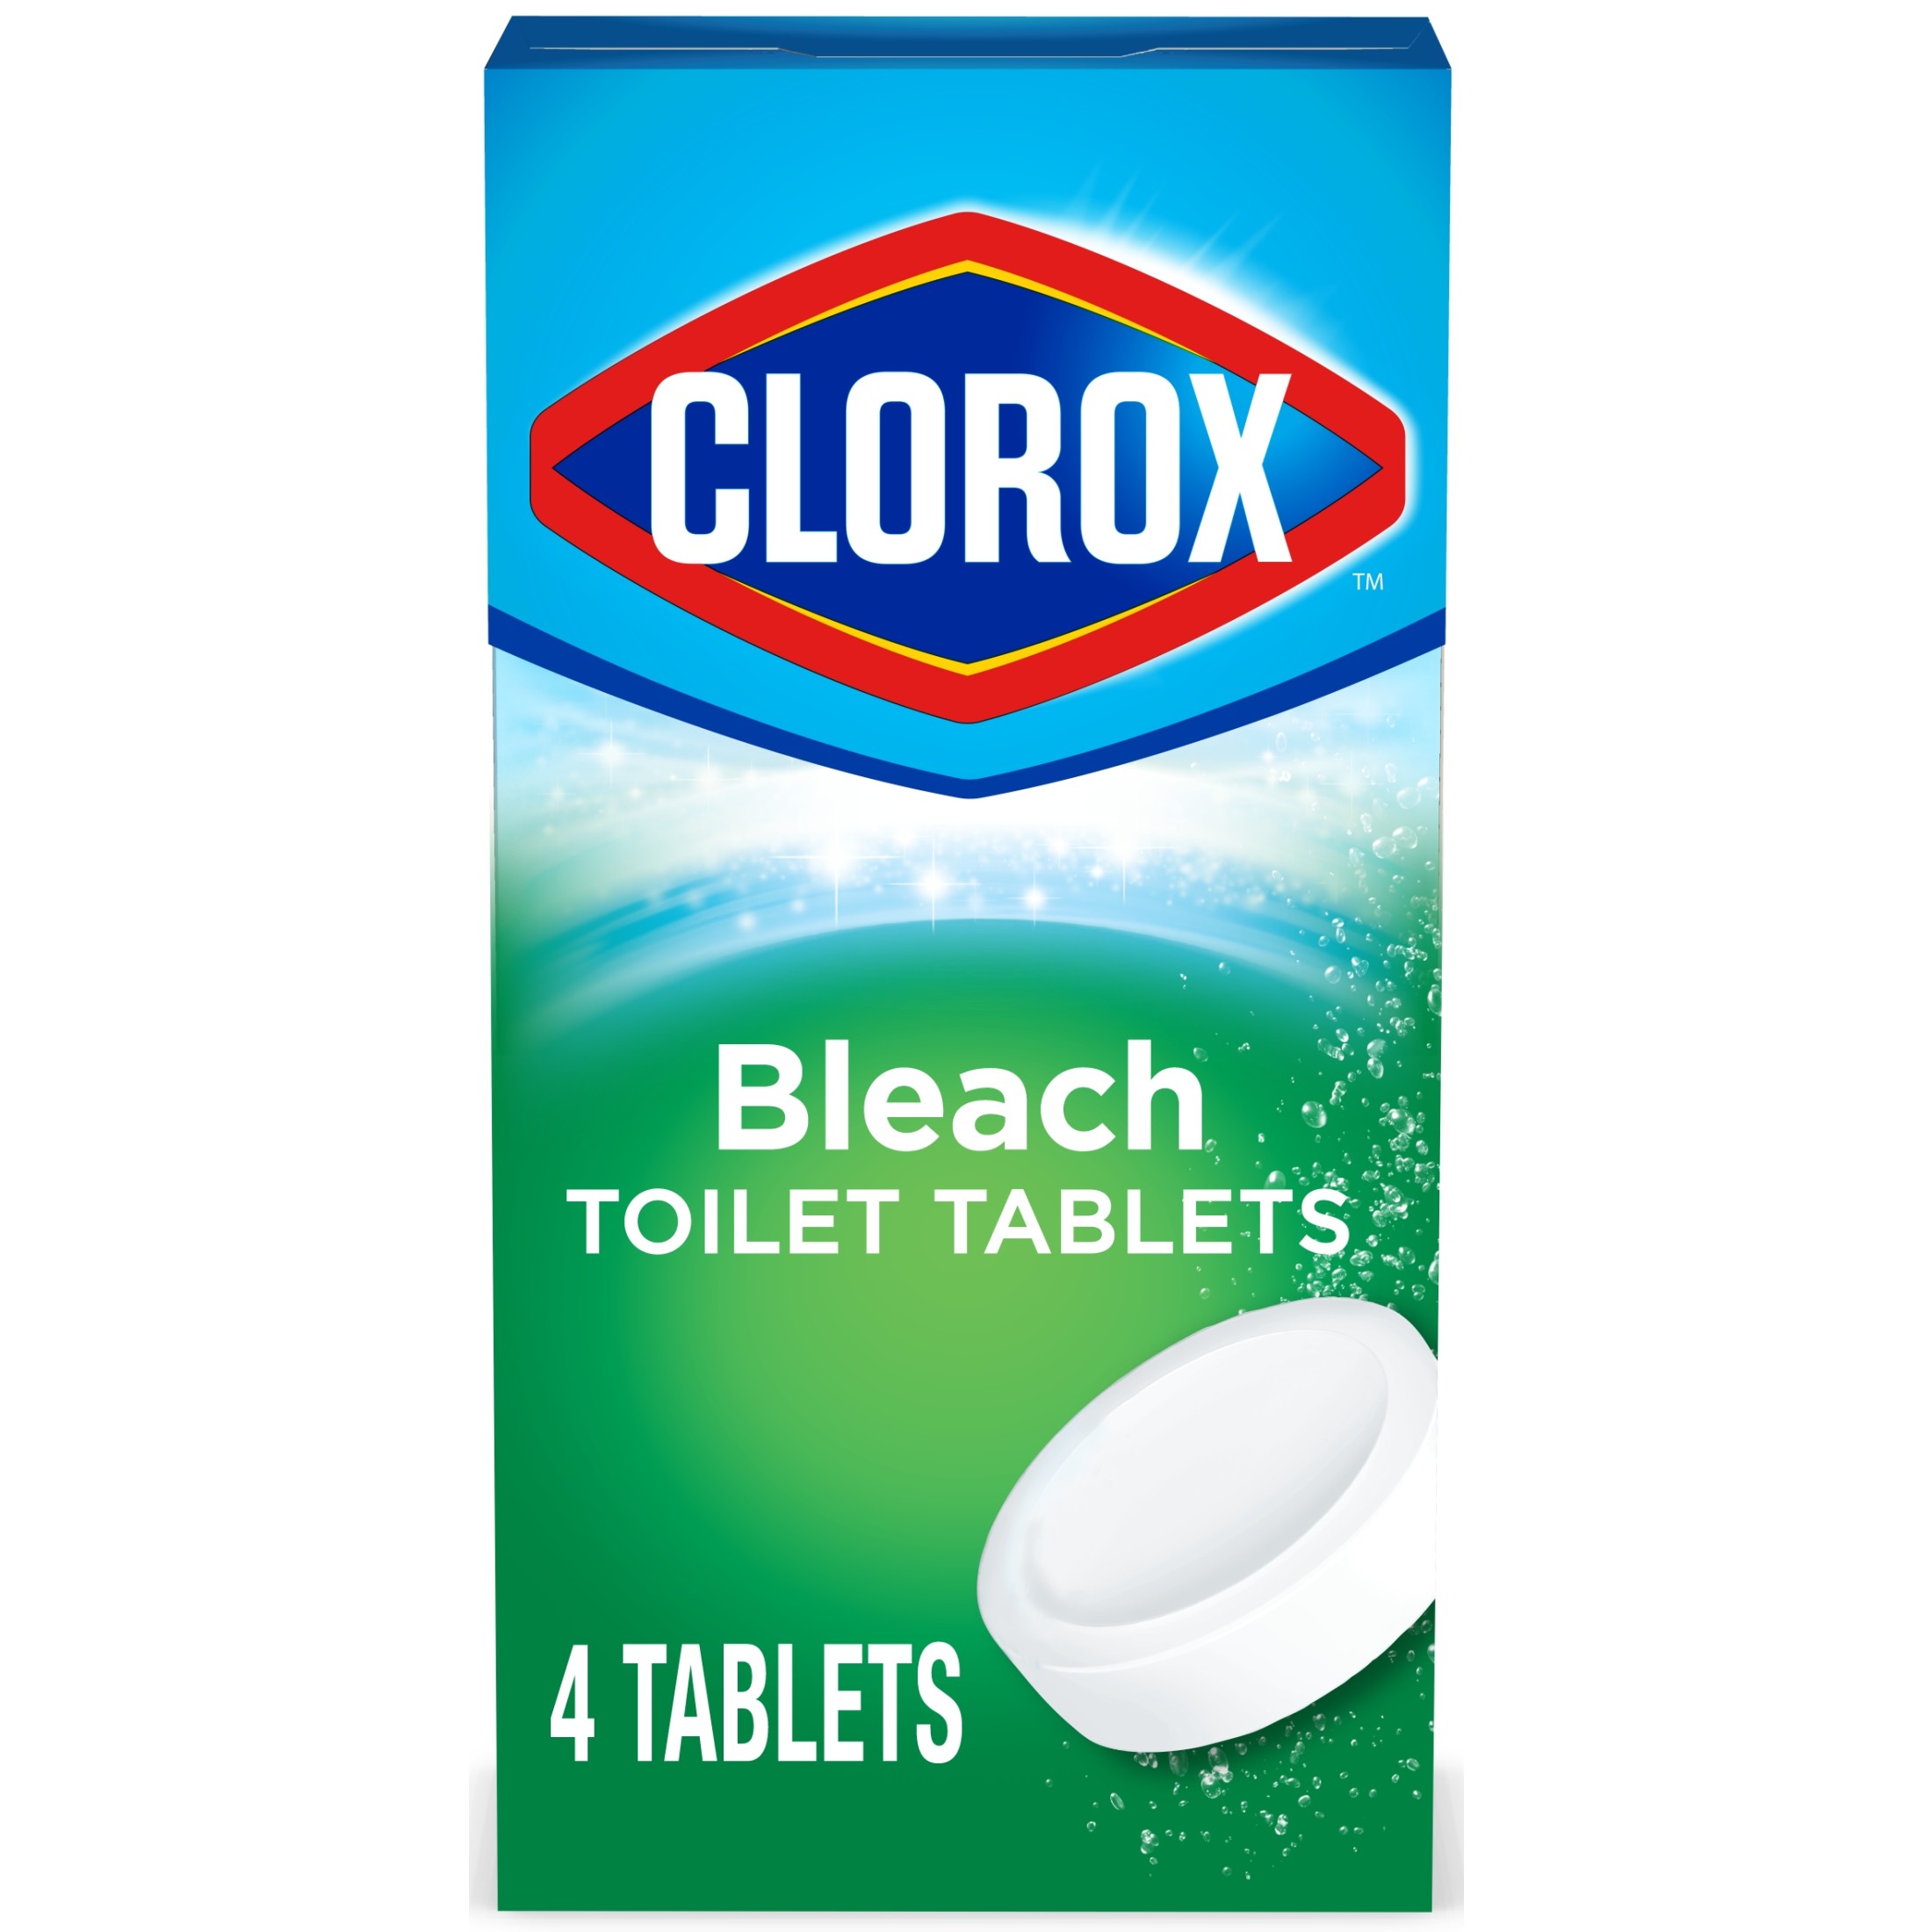 Clorox Bleach Automatic Toilet Bowl Cleaner Tablets, 4 Pack - image 1 of 11